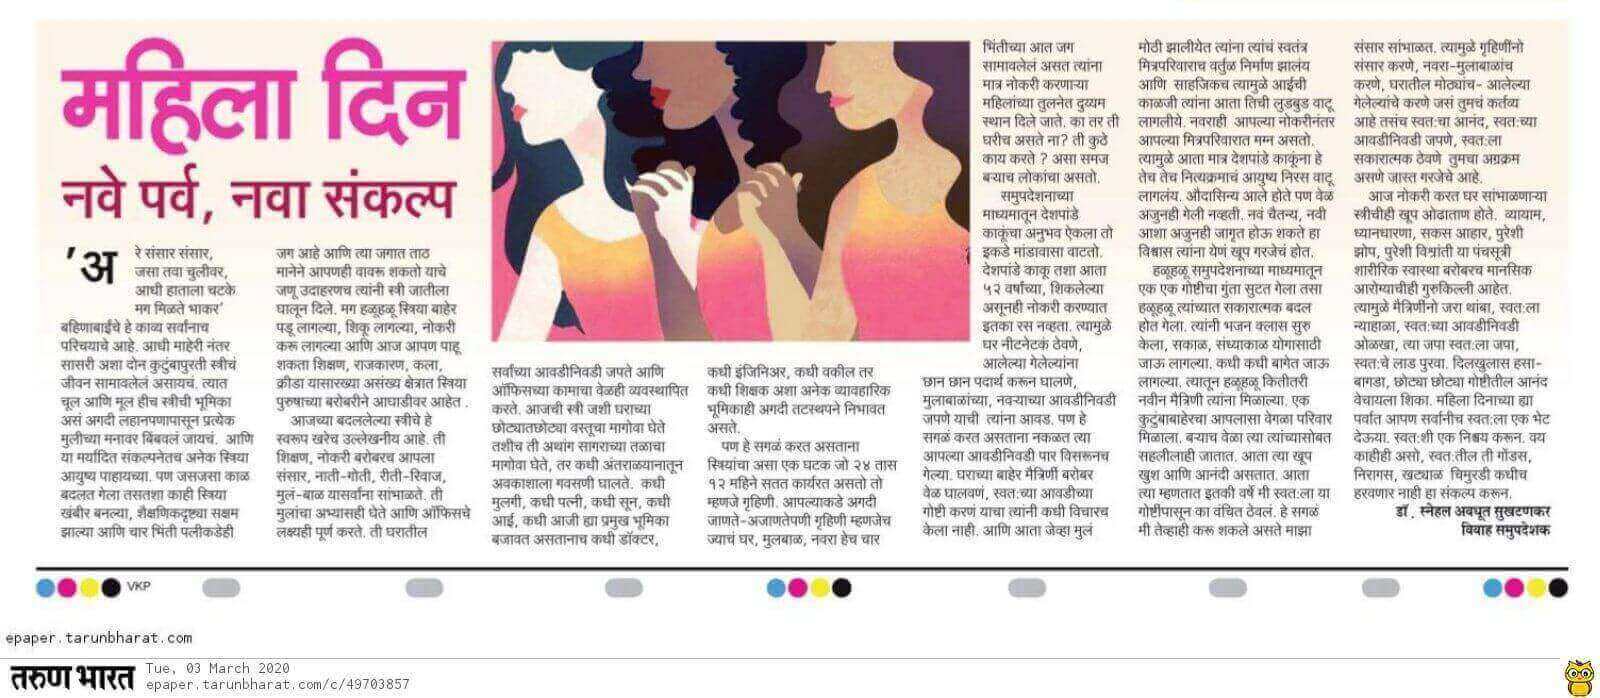 womens day article in marathi published by tarun Bharat